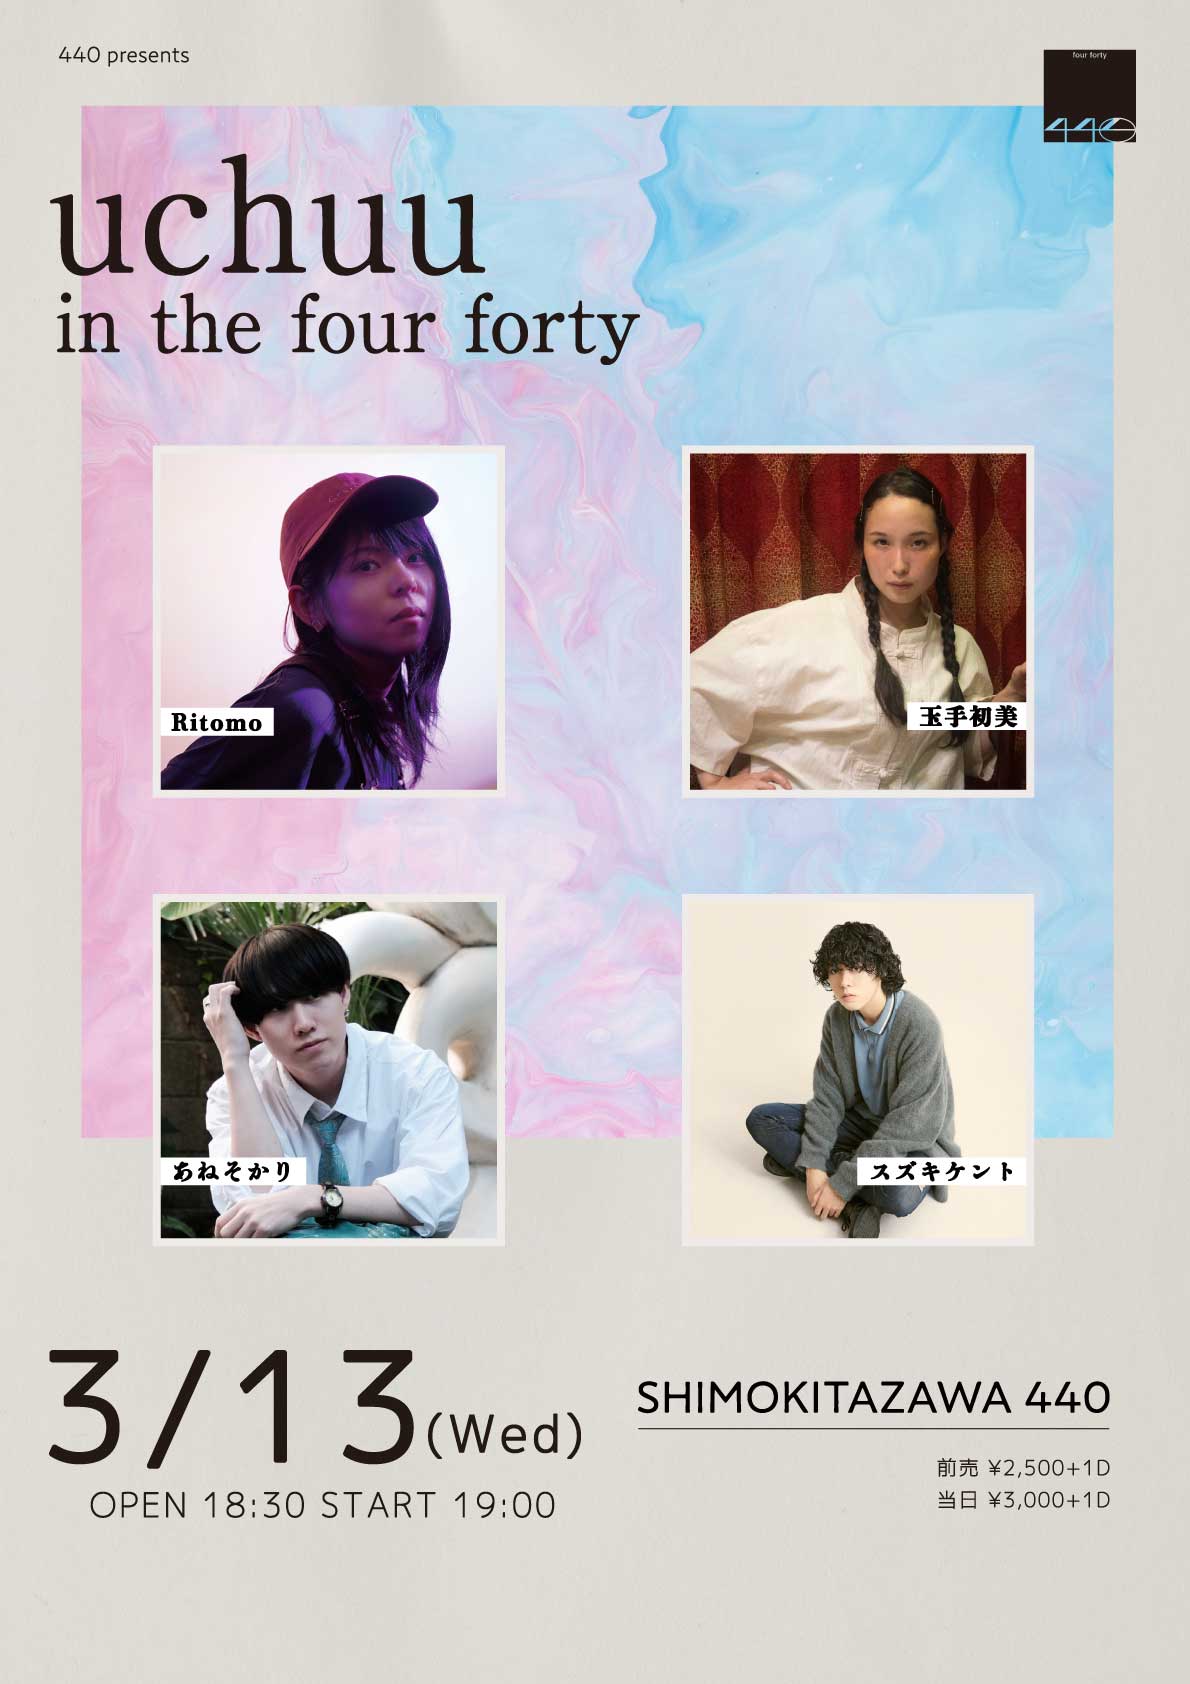 440 presents uchuu in the four fortyのチケット情報・予約・購入